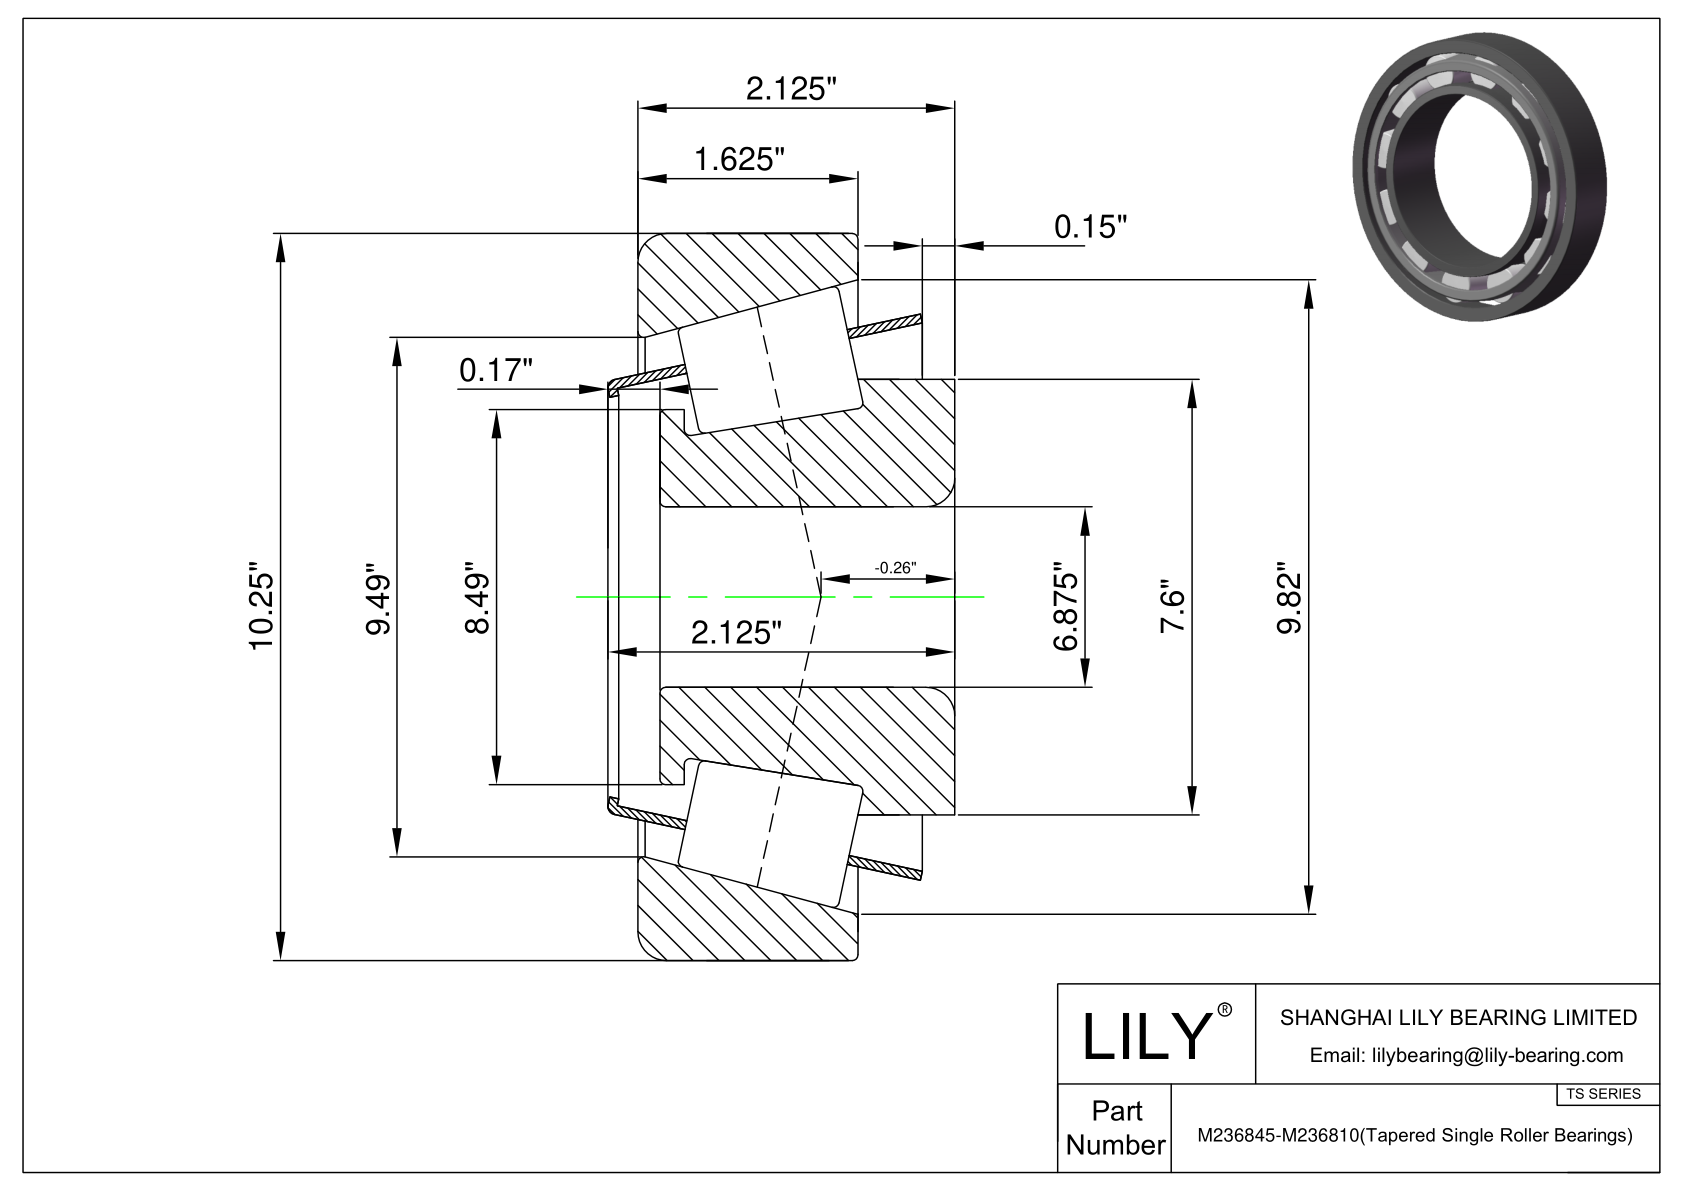 M236845-M236810 TS (Tapered Single Roller Bearings) (Imperial) cad drawing